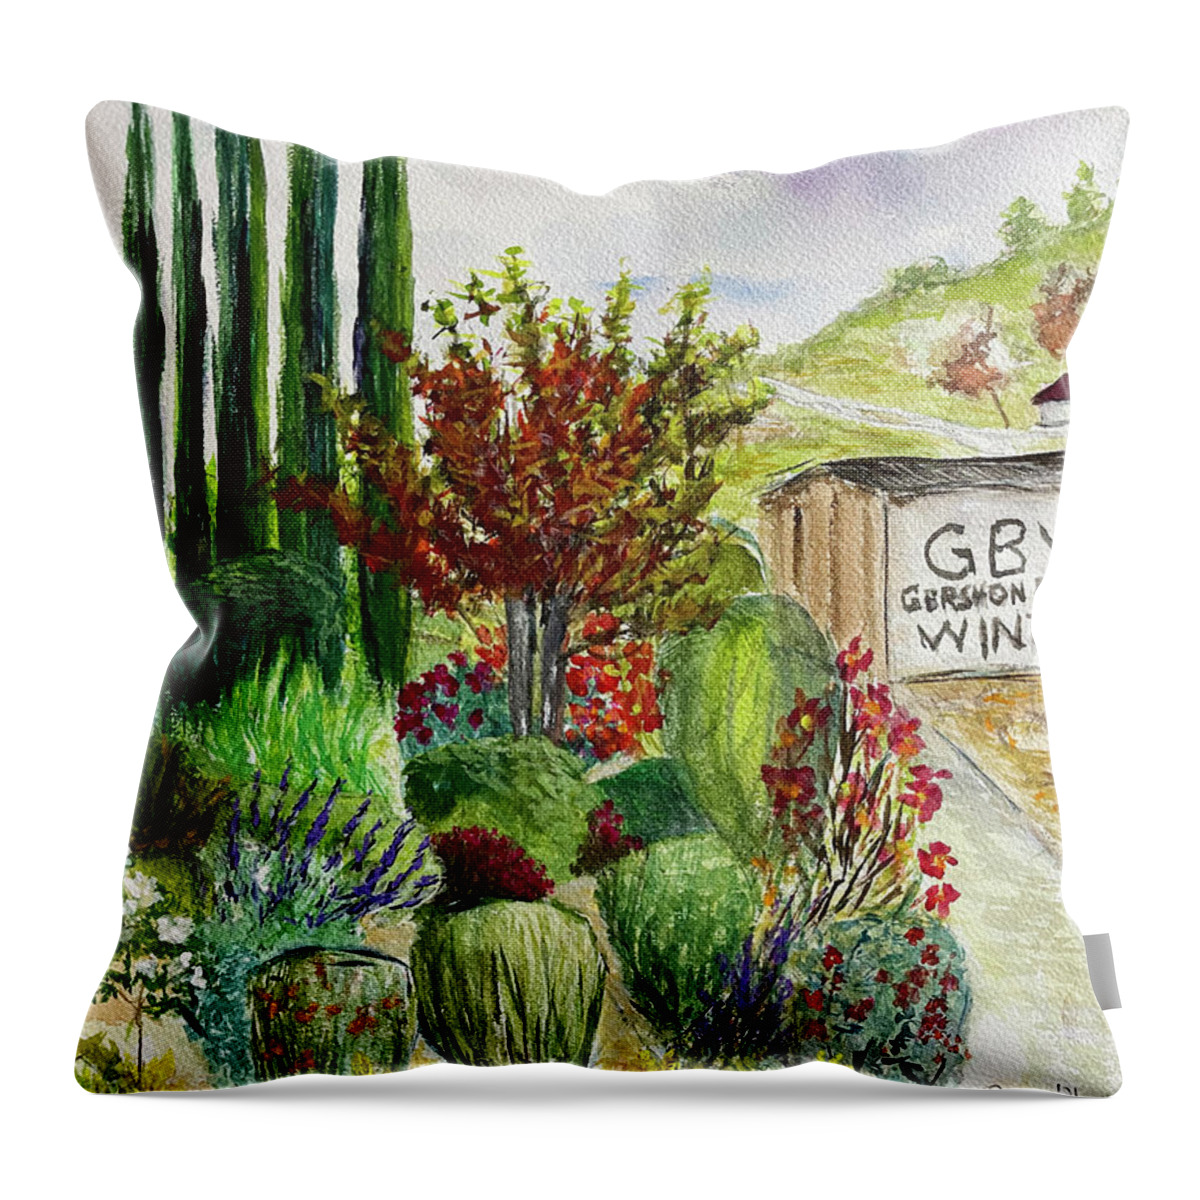 Gershon Bachus Vintners Throw Pillow featuring the painting Hill to the Barrel Room at GBV by Roxy Rich